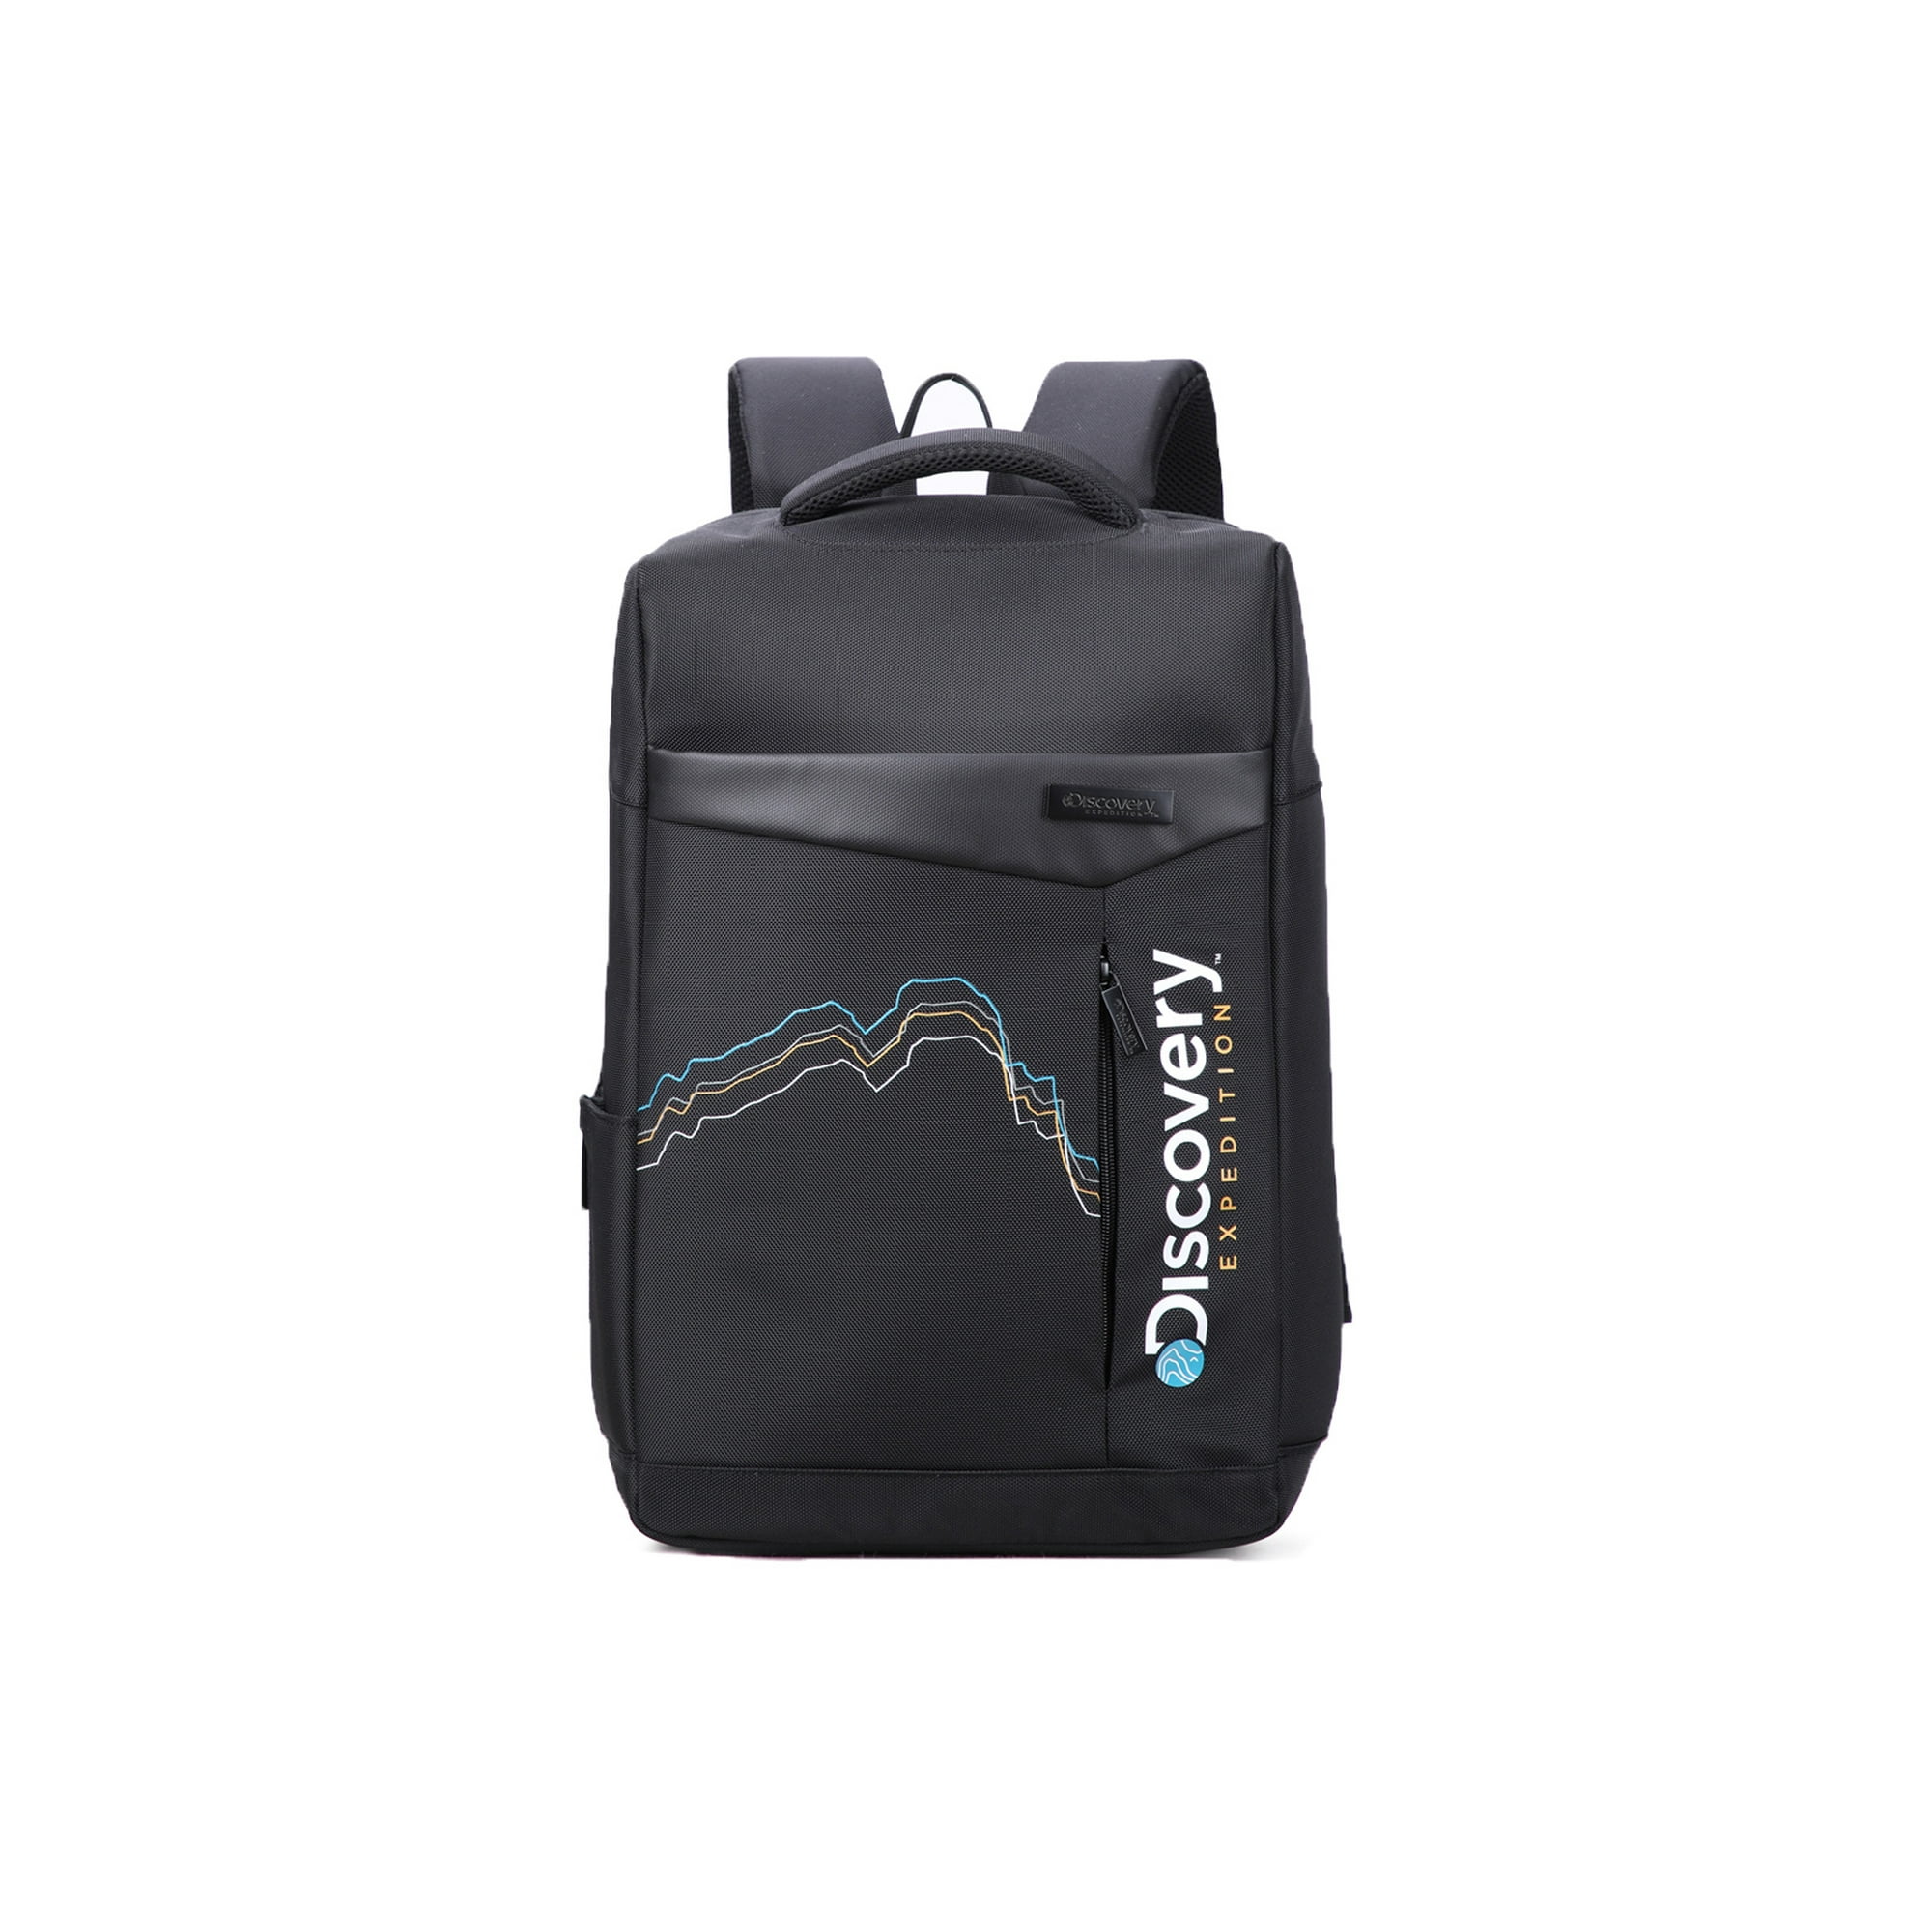 Mochila para laptop Discovery Expedition Backpack Negra SN77282